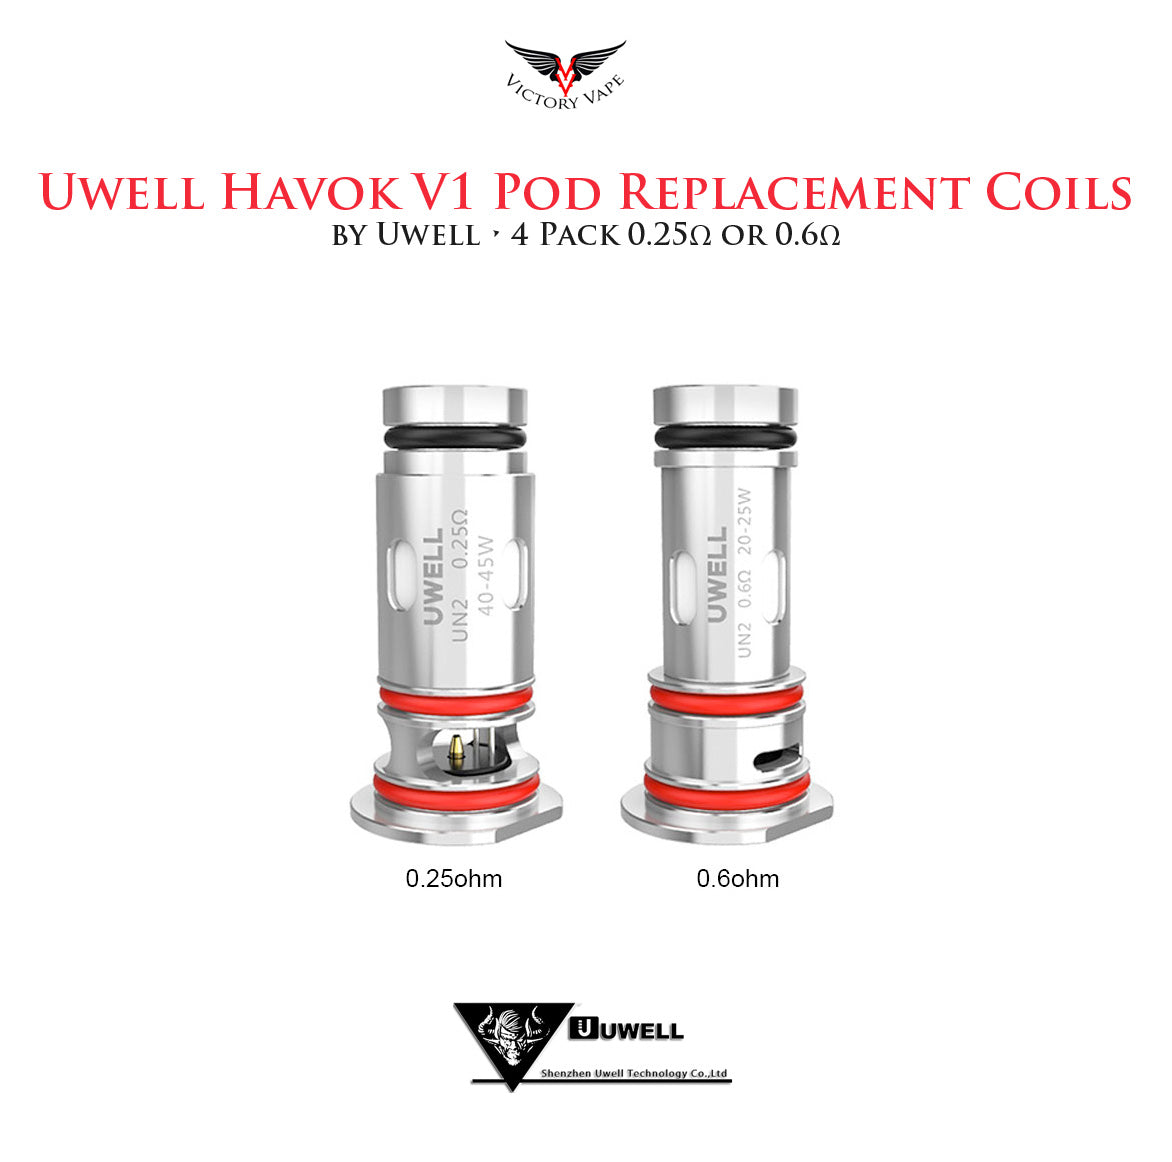  Uwell Havok V1 POD Replacement Coils • 4 Pack 